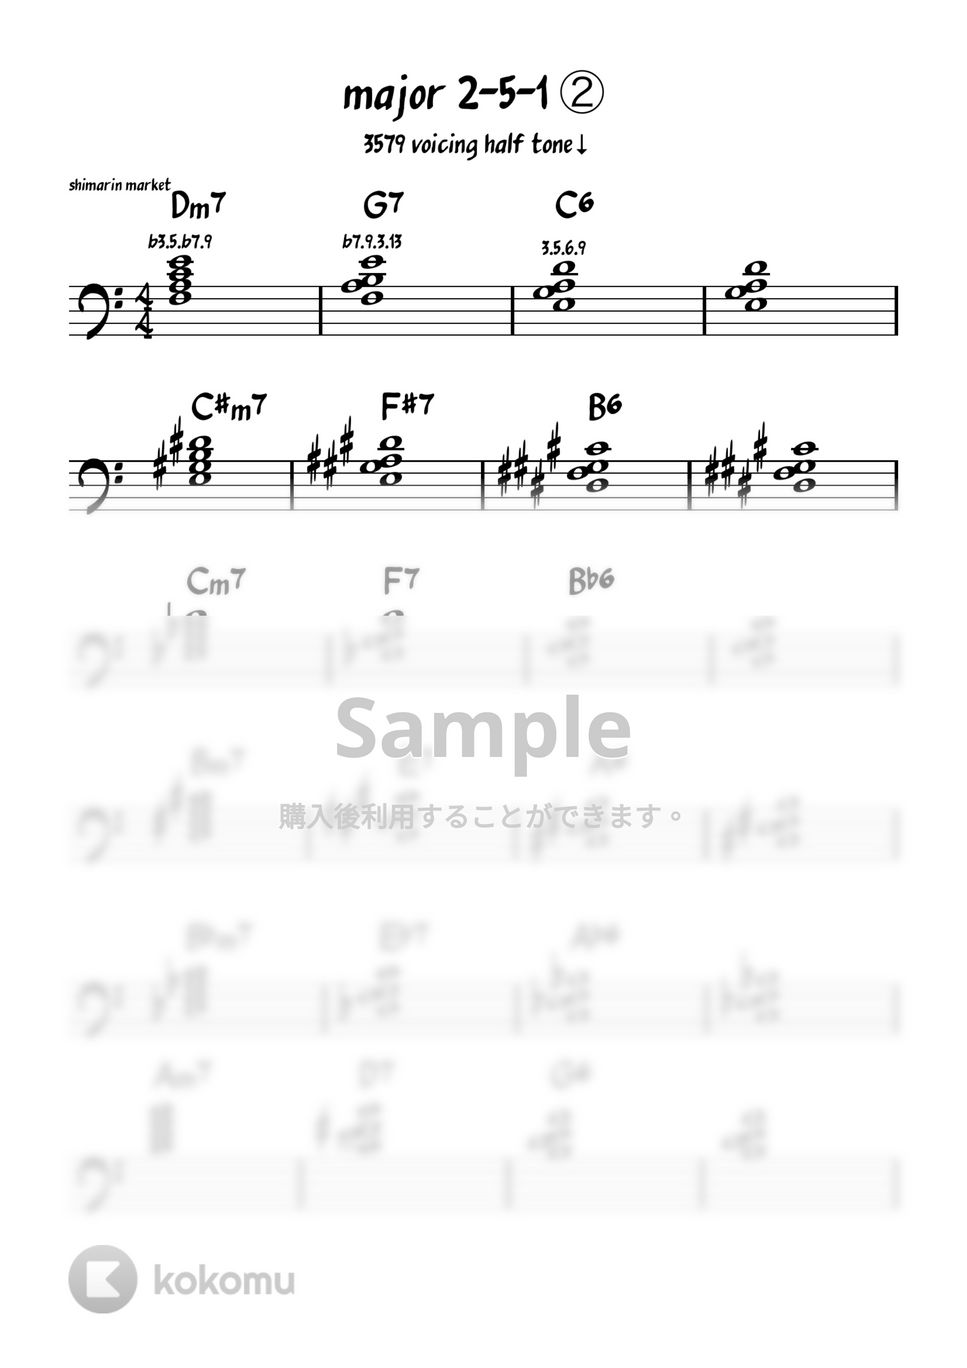 shimarinmarket - major 2-5-1 ①3579 half tone↓exercise (for the left hand practice)